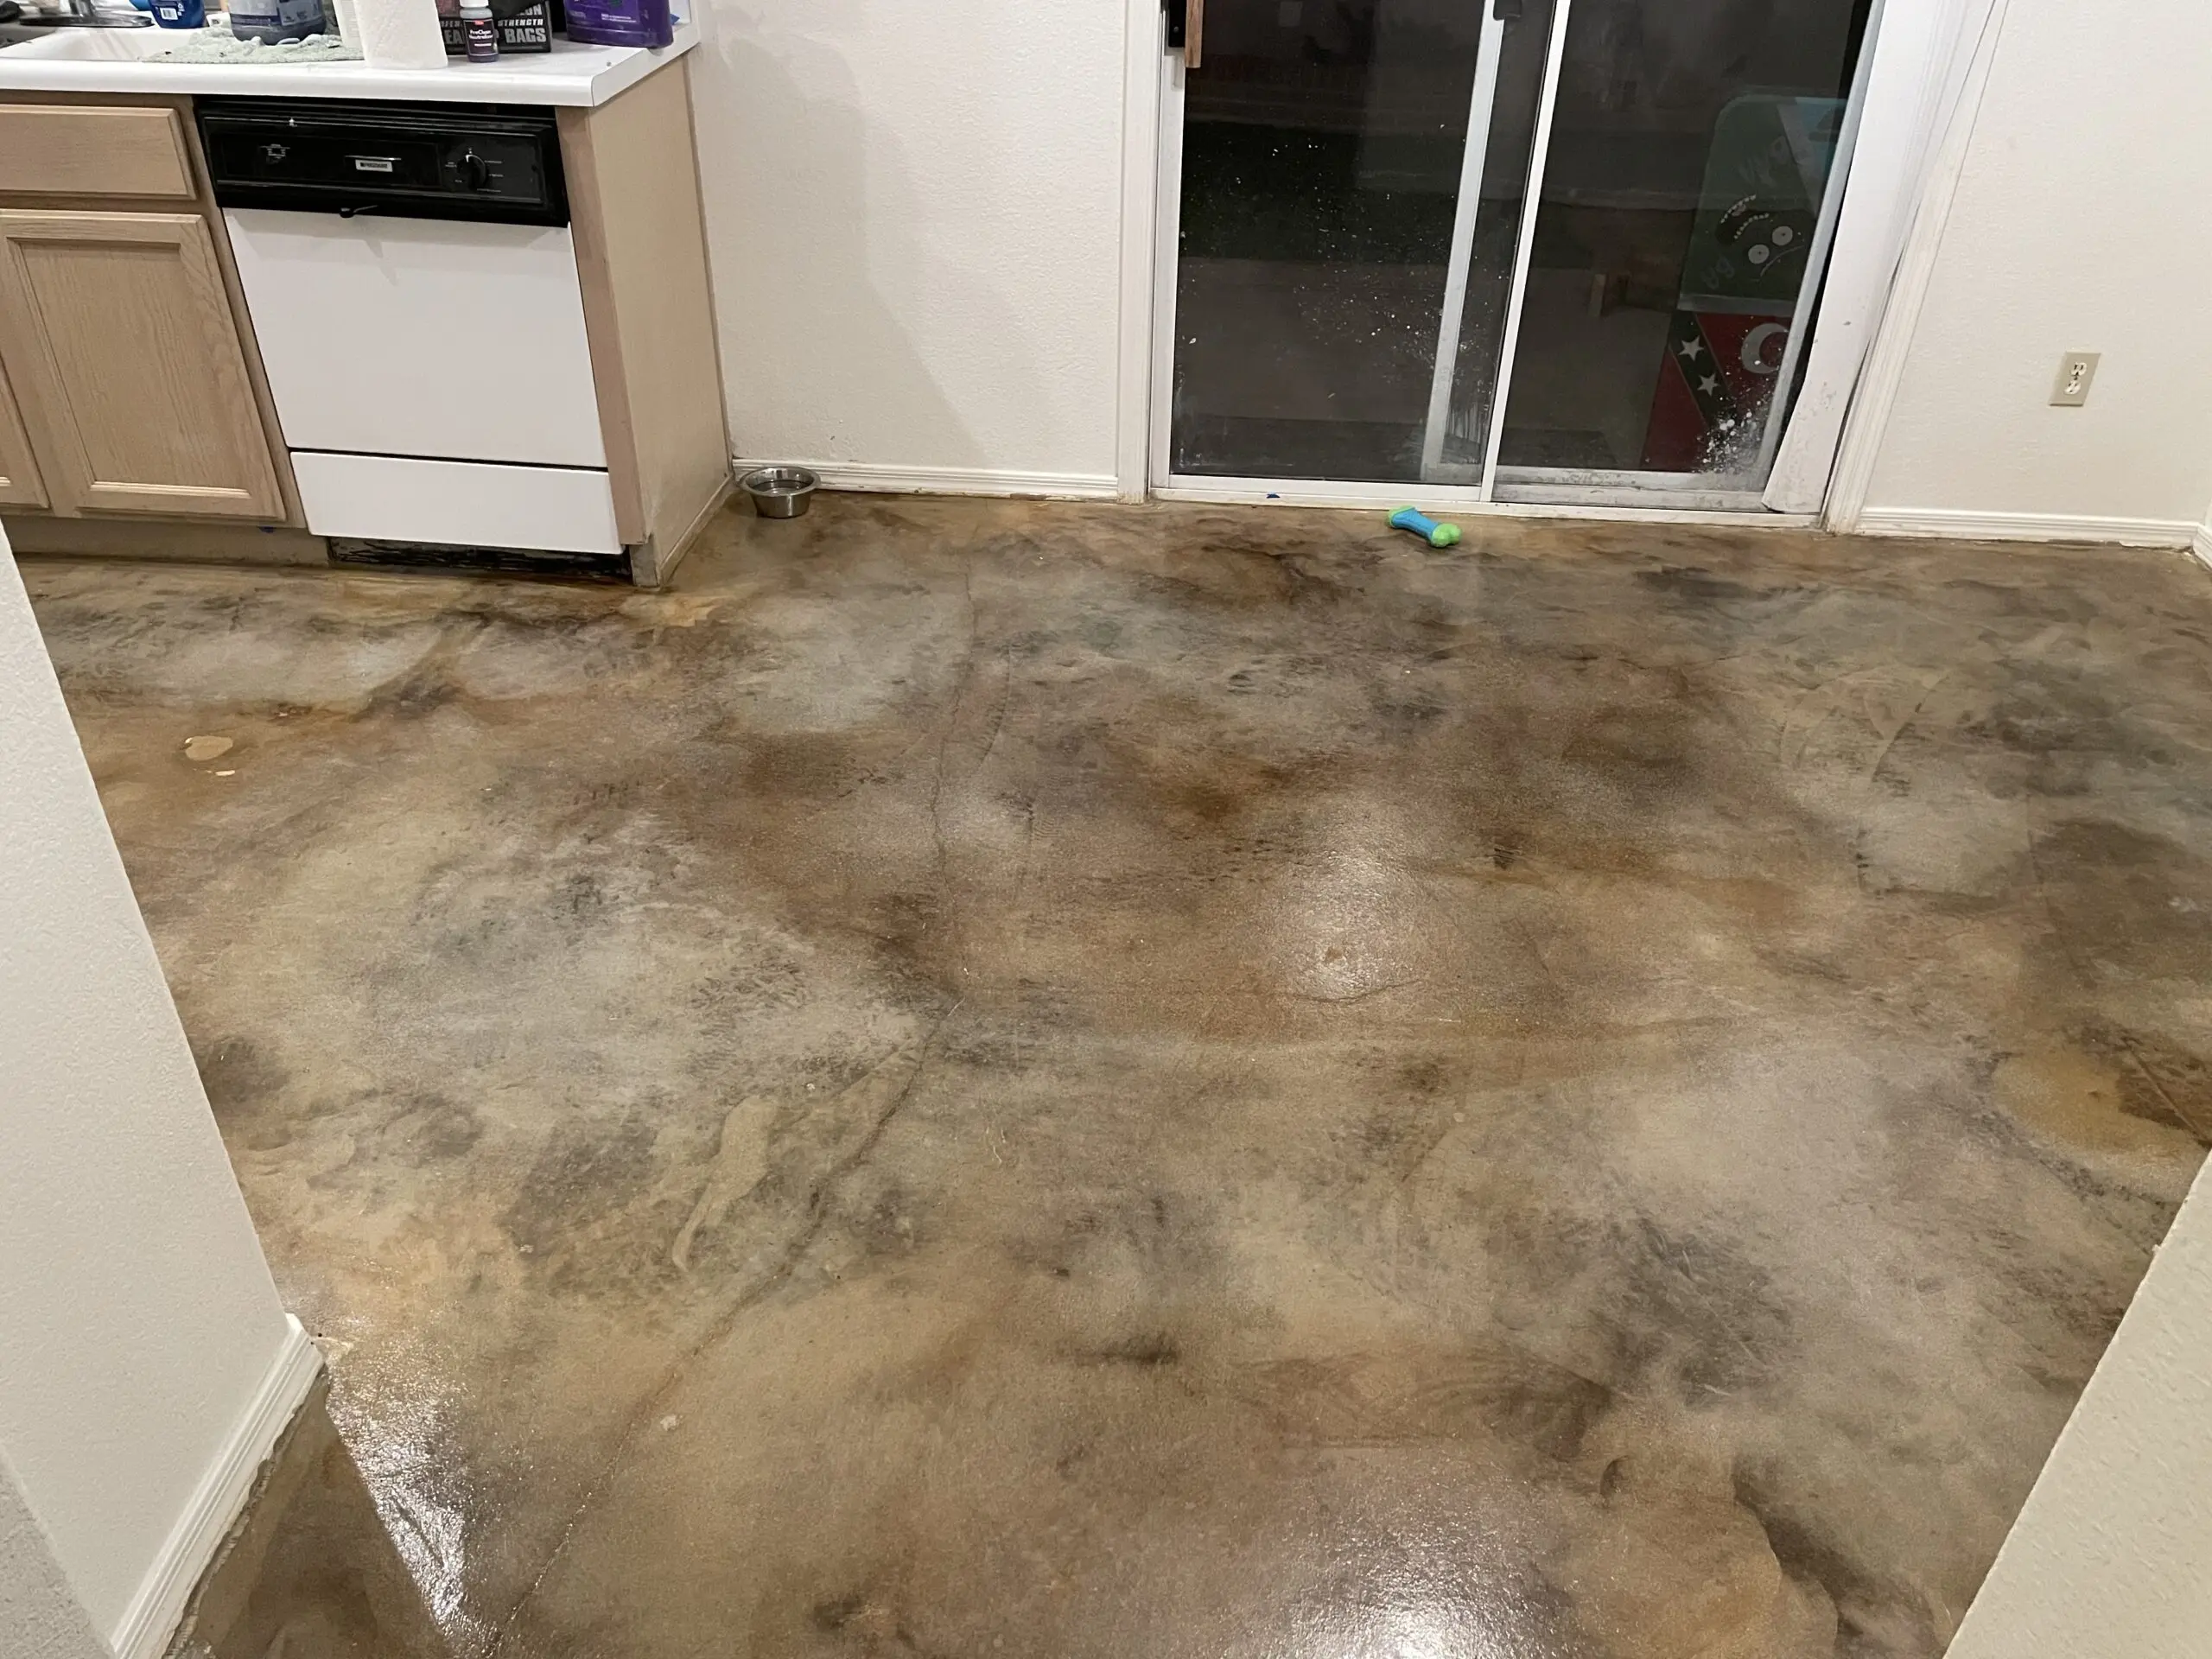 A photo showcasing the finished kitchen floor displaying a unique, worn leather look after the application of the acid stain.